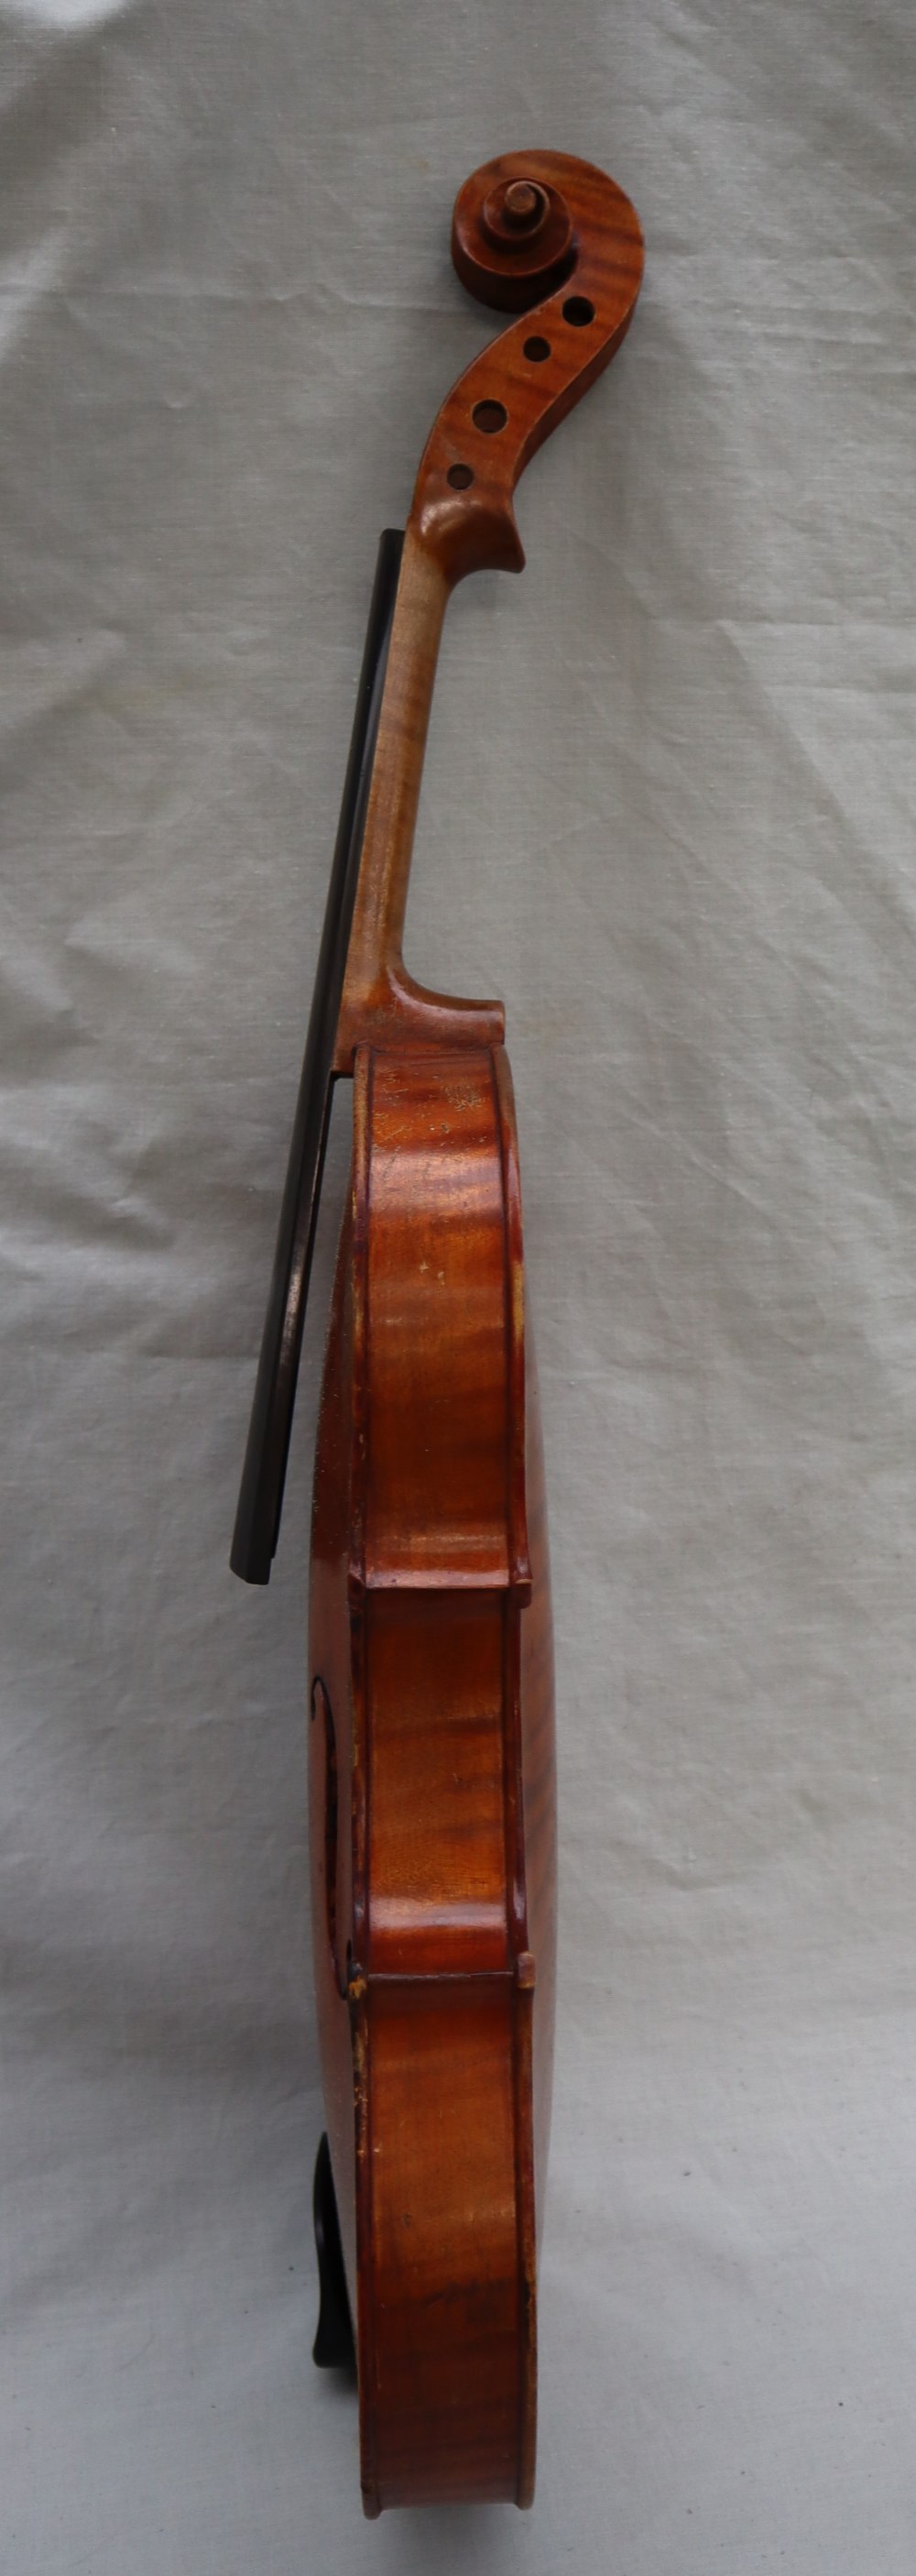 A violin with a two piece back, bears a trade label The Garrodus violin, dated 1897, overall 58. - Image 9 of 14